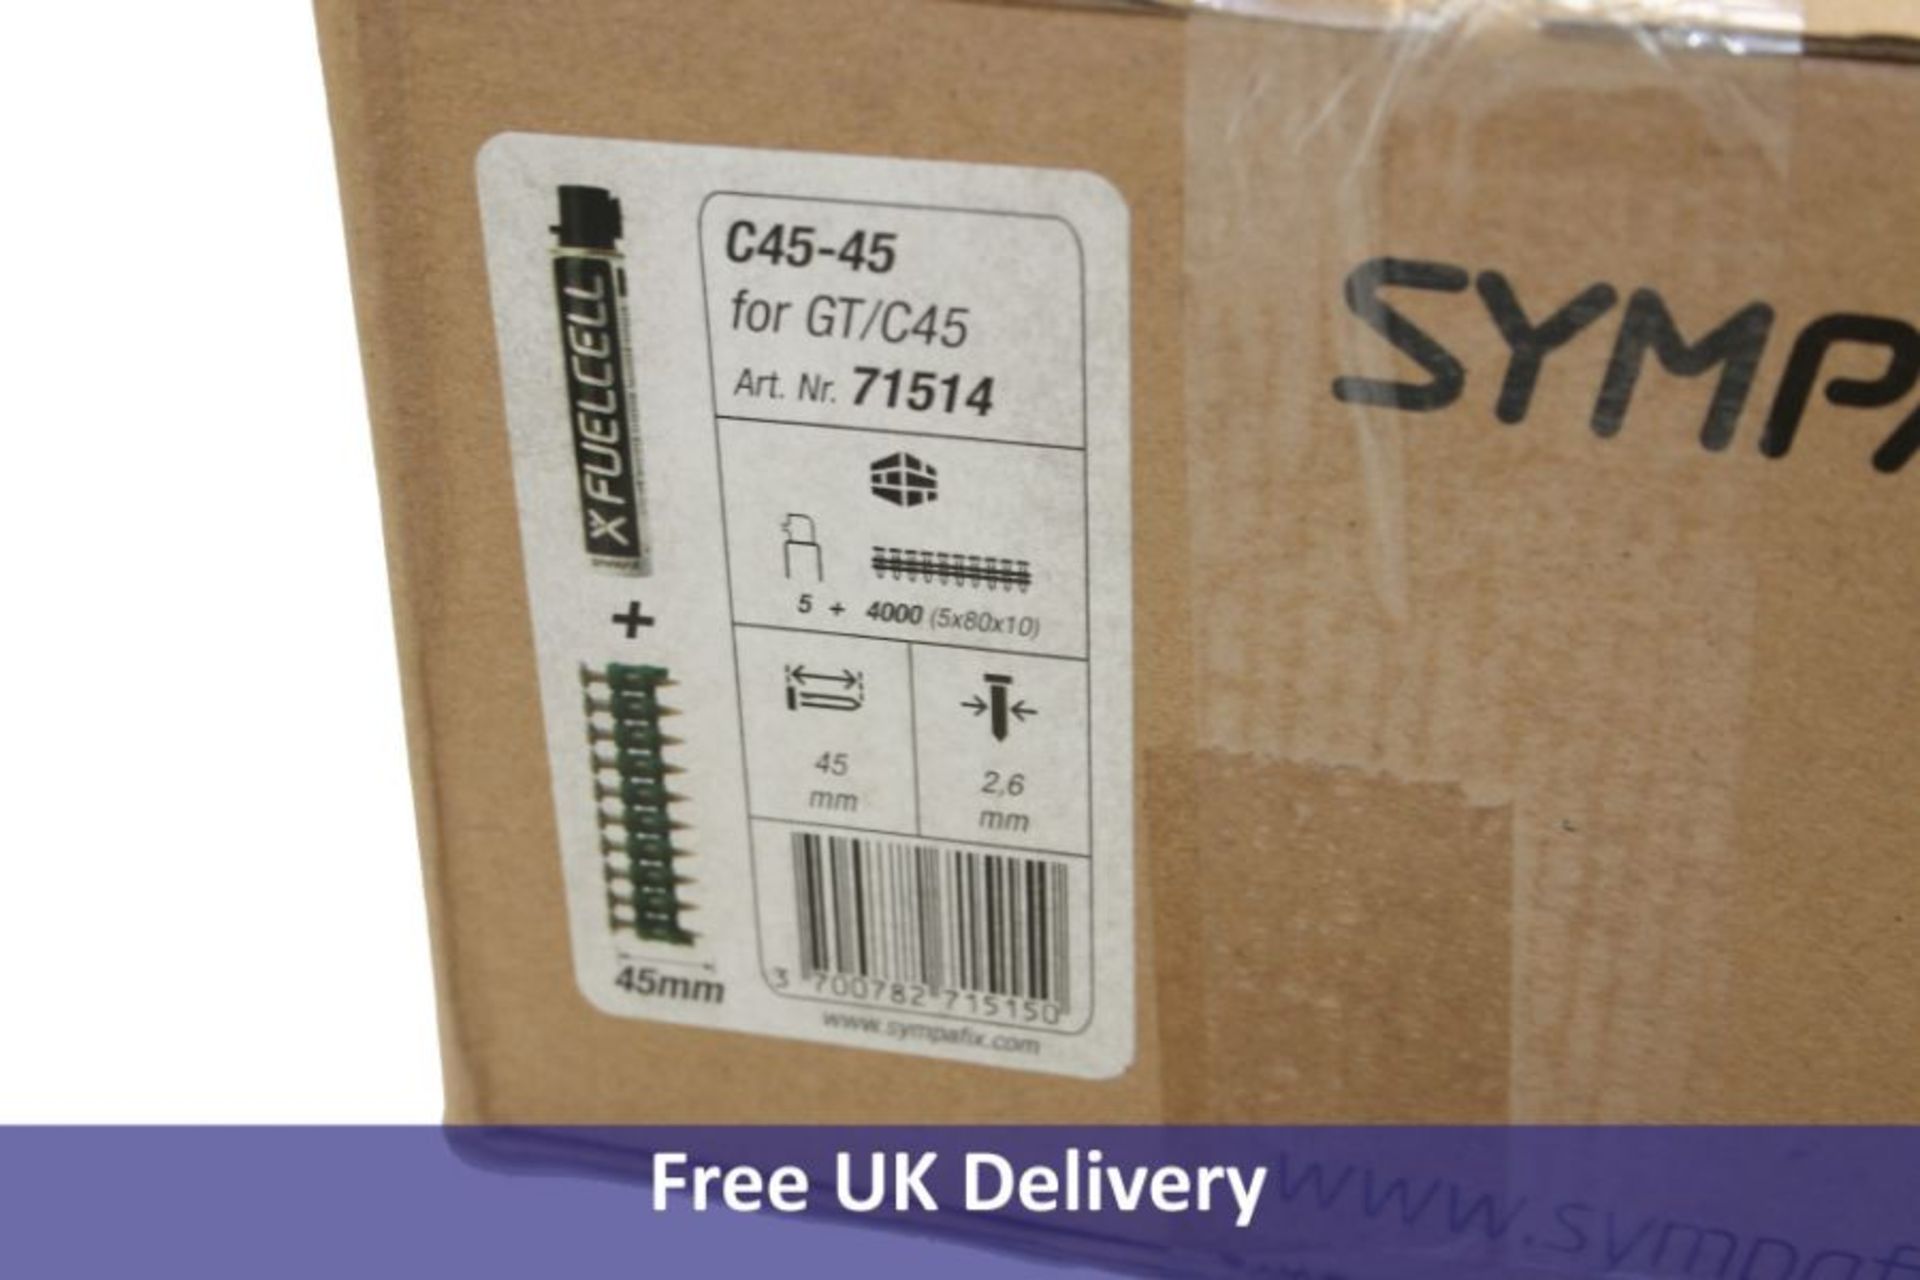 Sympafix C45-45 45mm x 2.66mm nails for Gas Nailer, 15x boxes of 4000 nails - Image 2 of 2